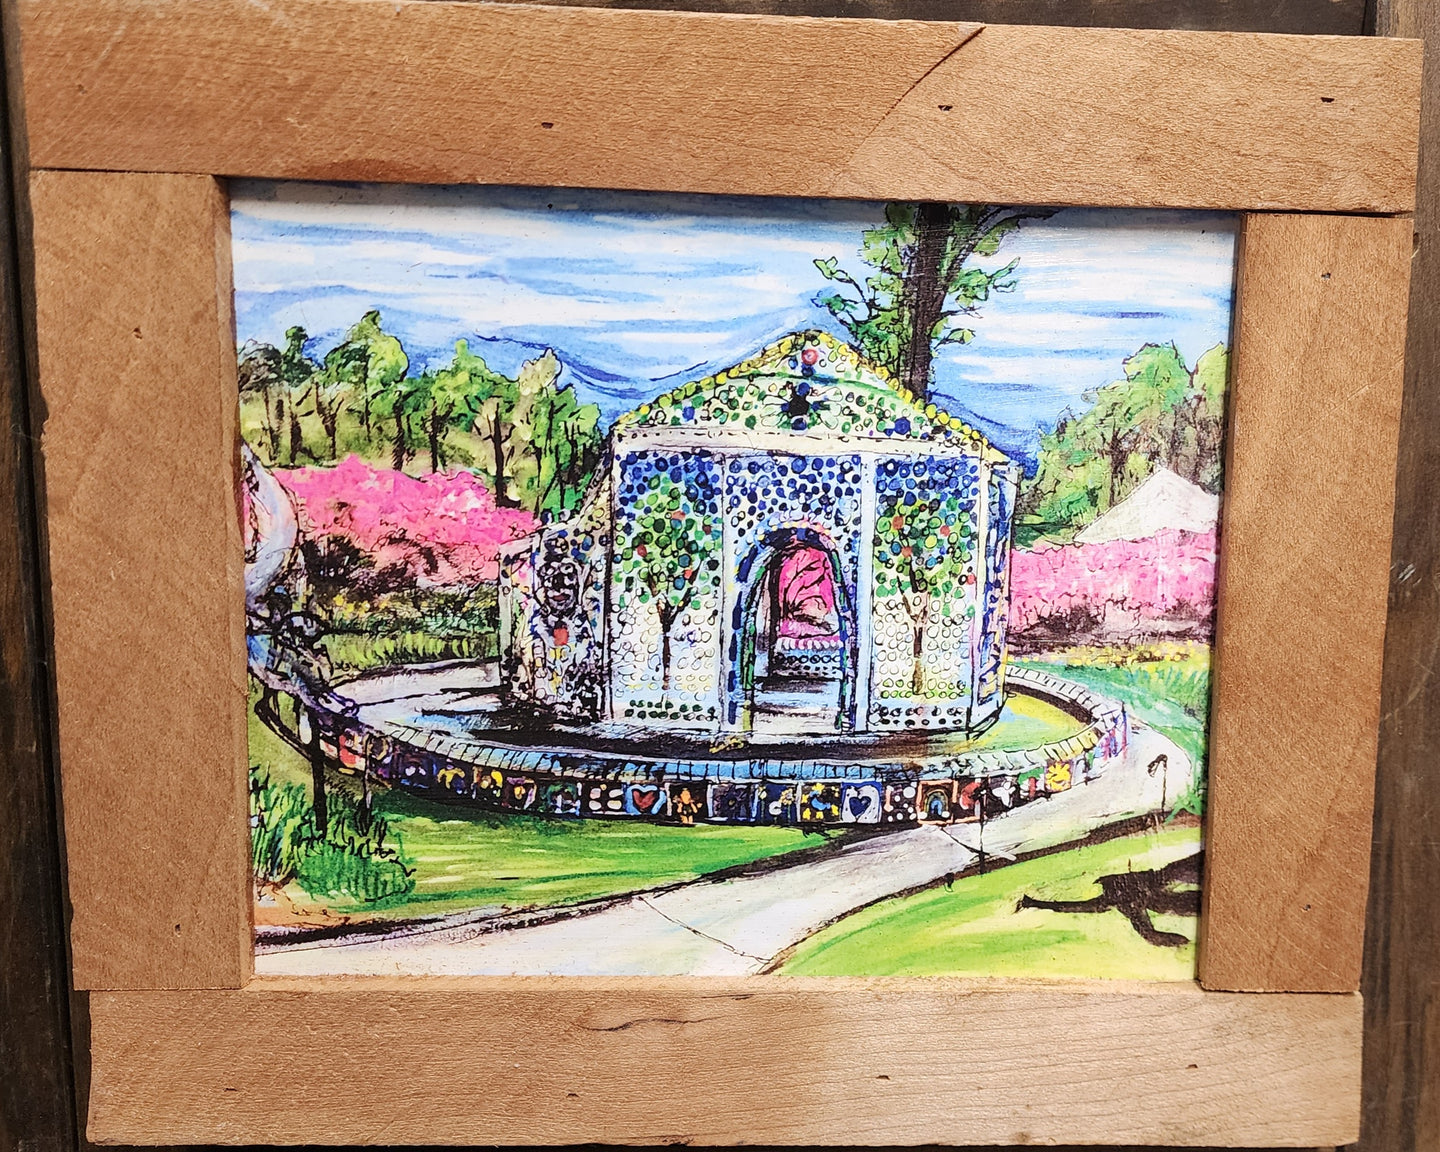 Airlie gardens bottle chapel signed framed 11x12 ready to hang